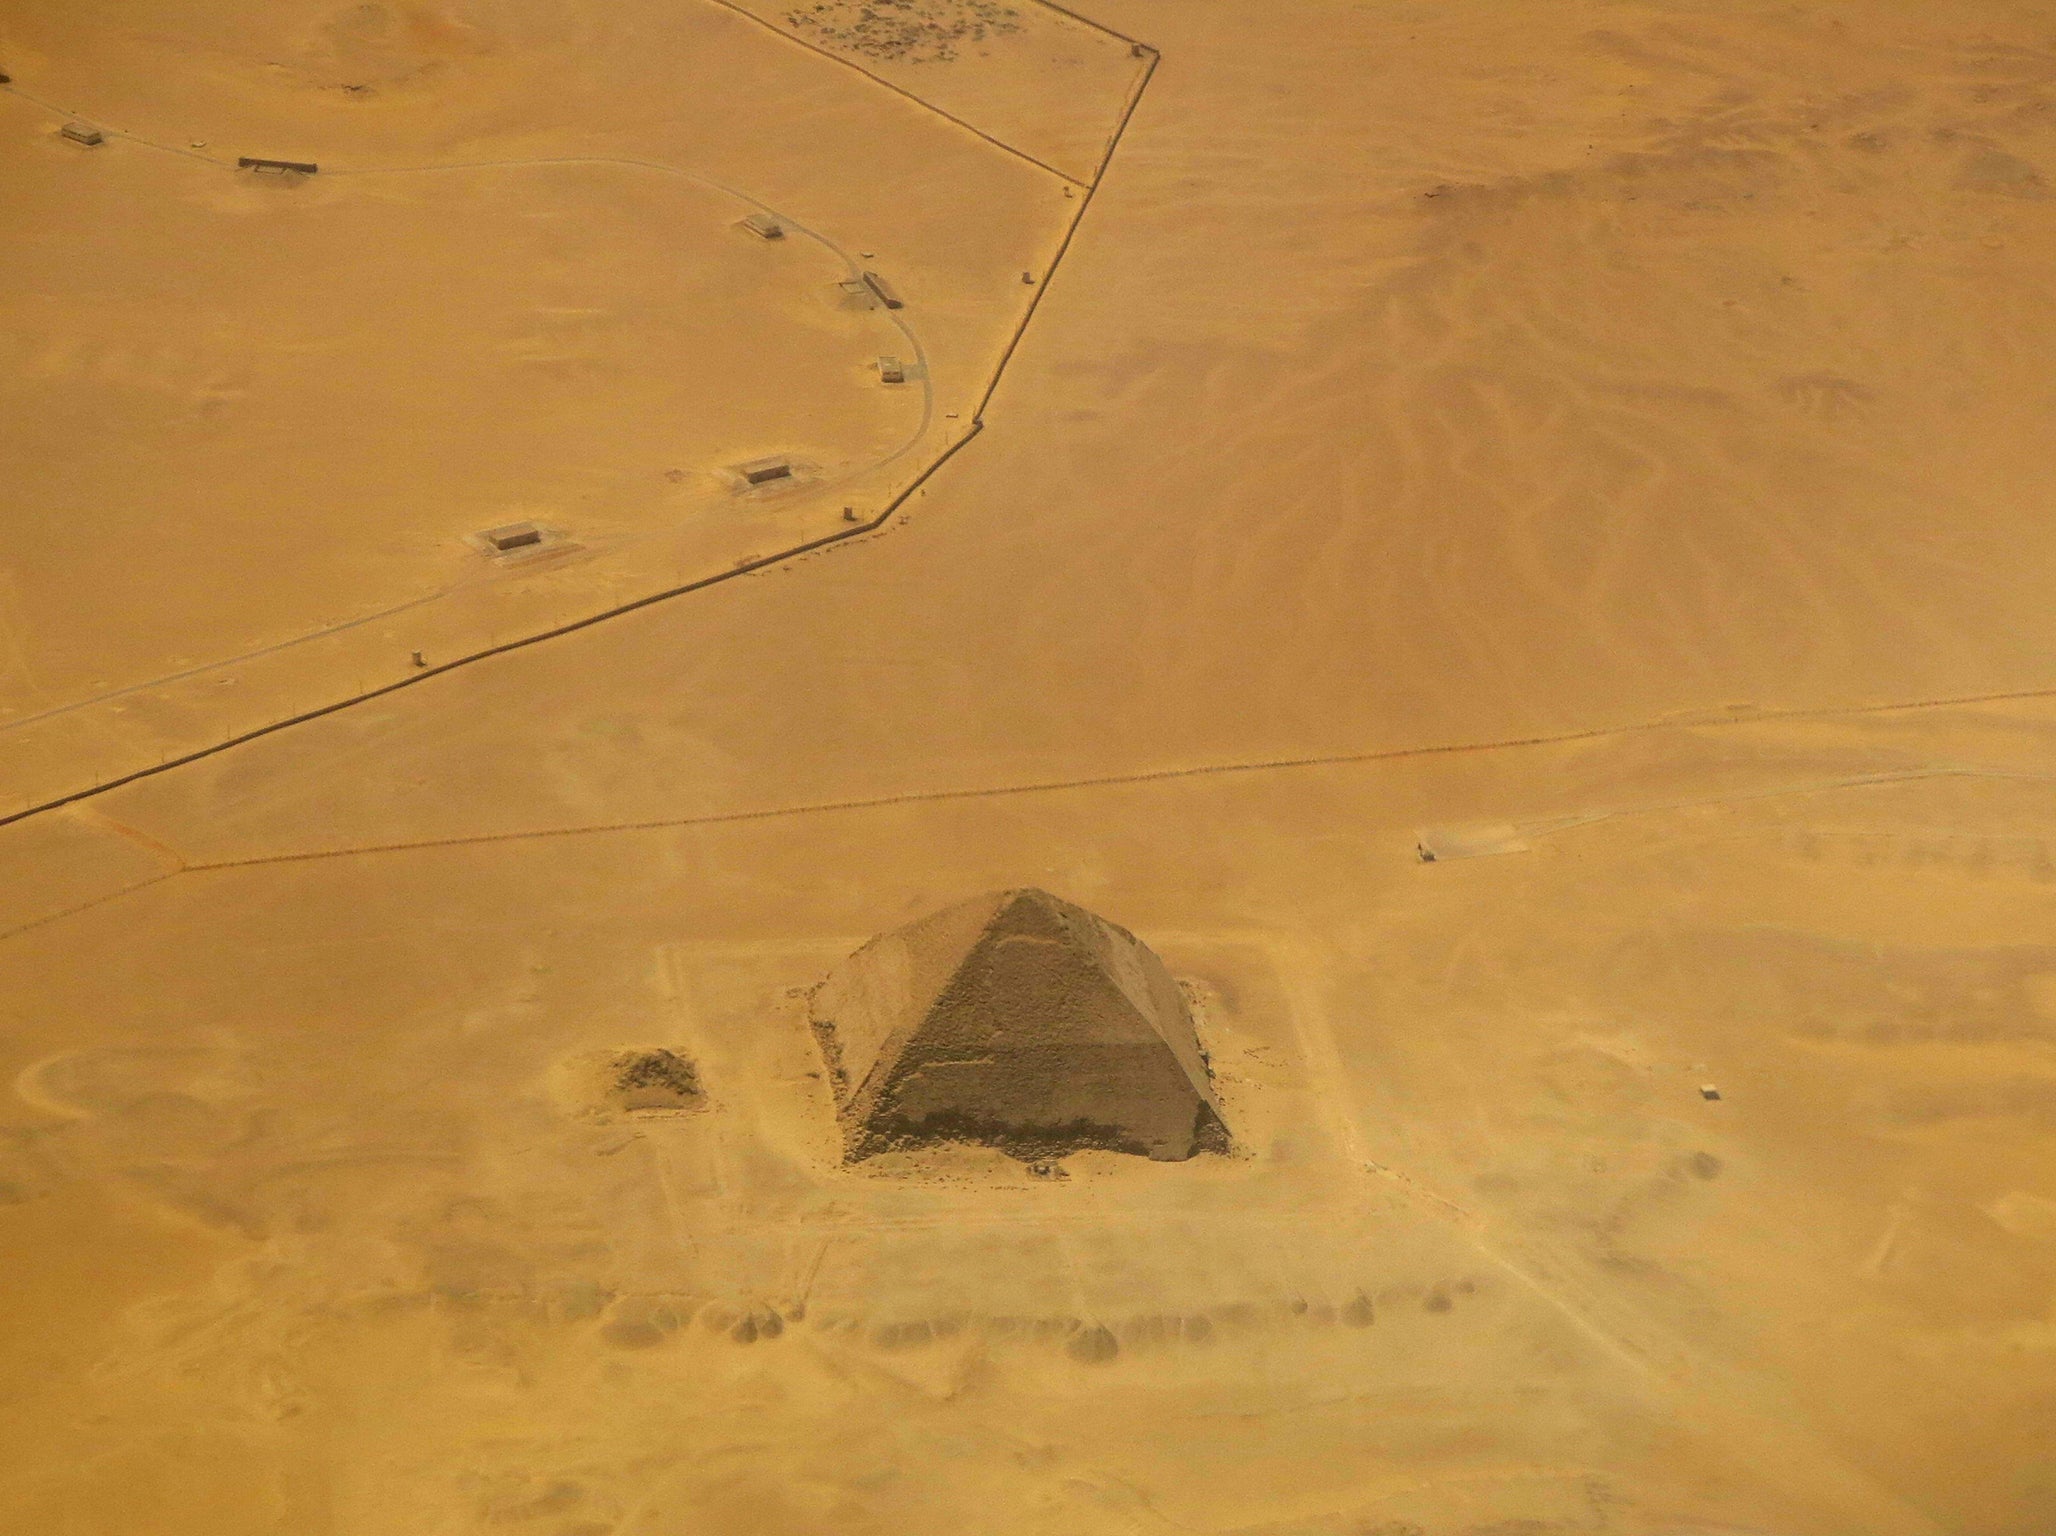 A picture taken on April 19, 2015 shows an aerial view of the bent pyramid of Dahshur, a royal necropolis located in the desert on the west bank of the Nile river, just south of Cairo